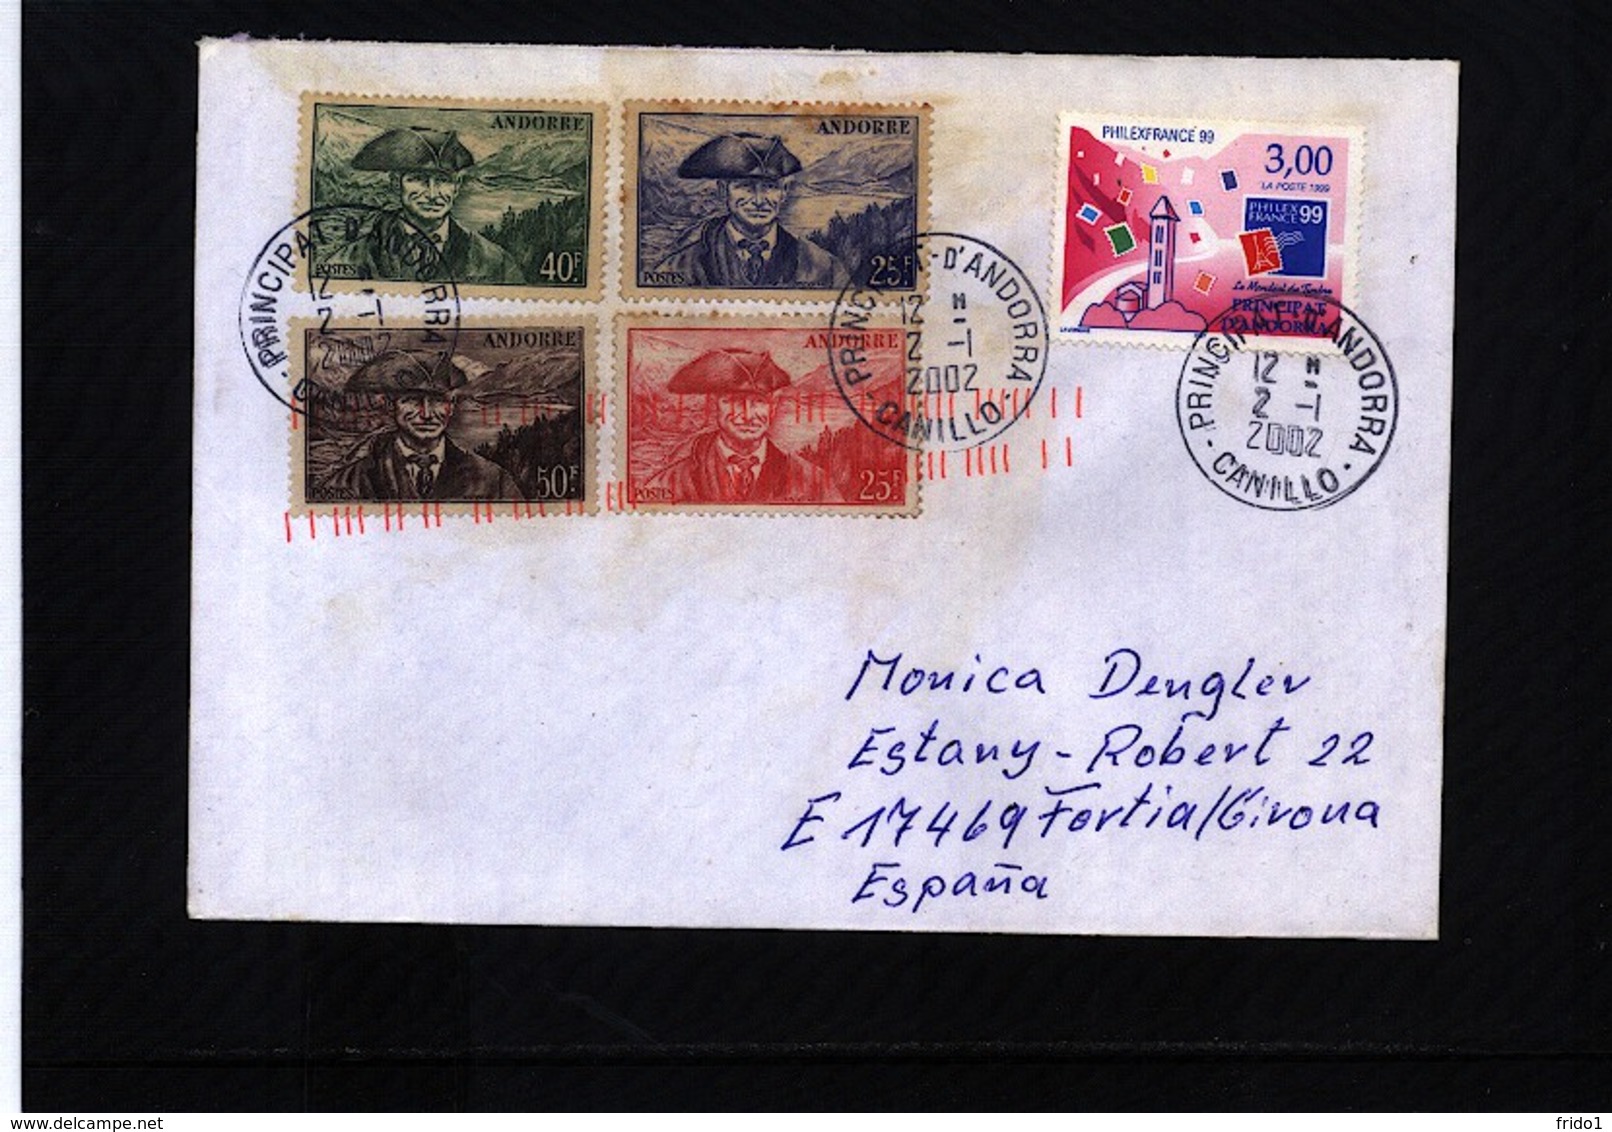 French Andorra 2002 Interesting Letter - Covers & Documents